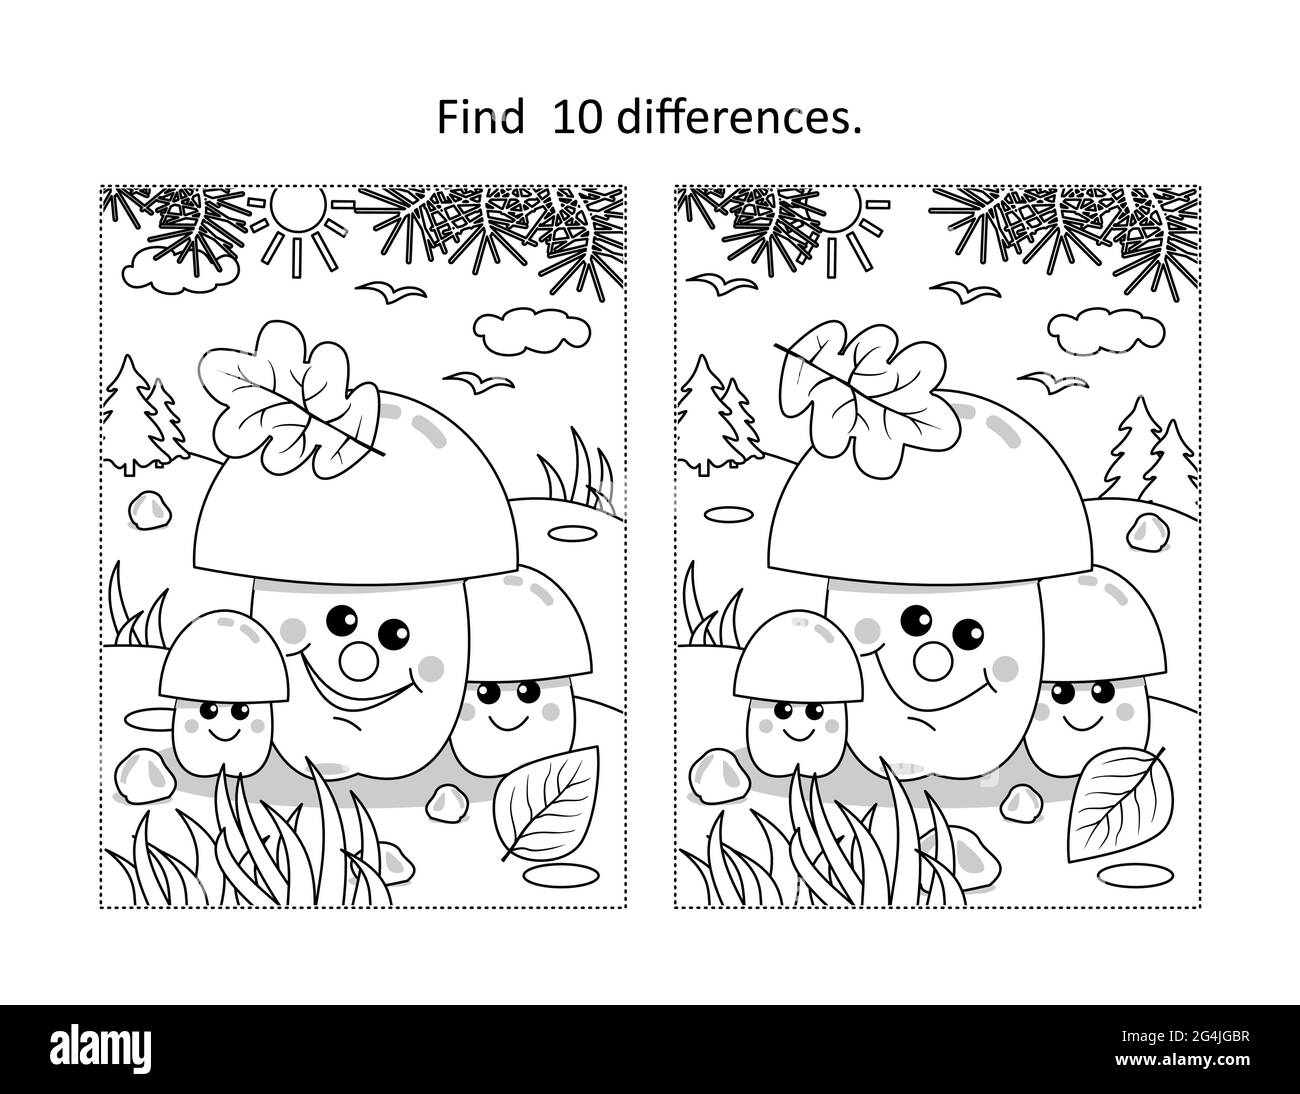 spot-the-difference-puzzle-black-and-white-stock-photos-images-alamy